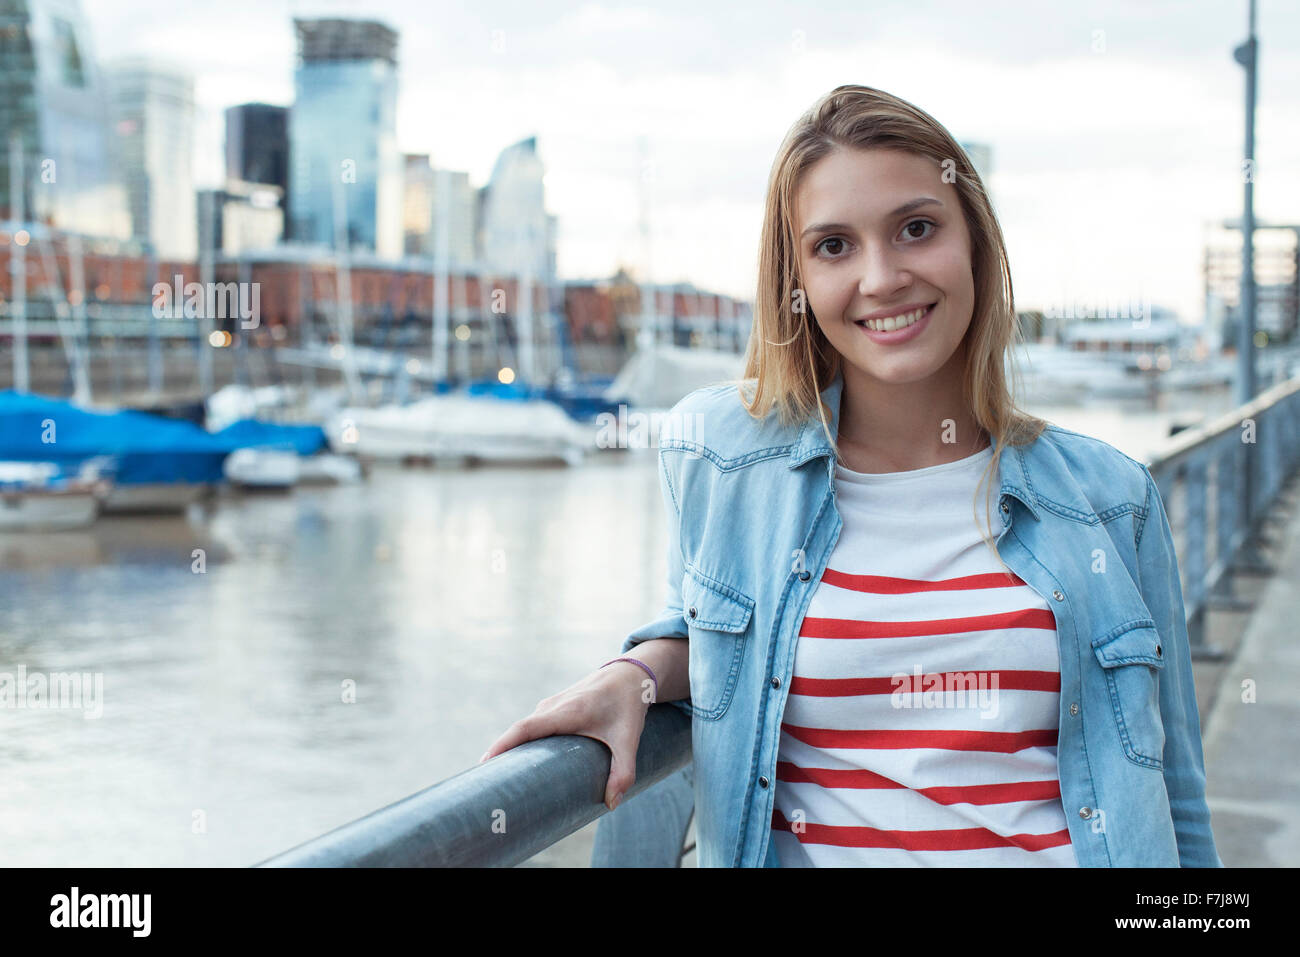 Young woman leaning against railing, smiling, portrait Stock Photo